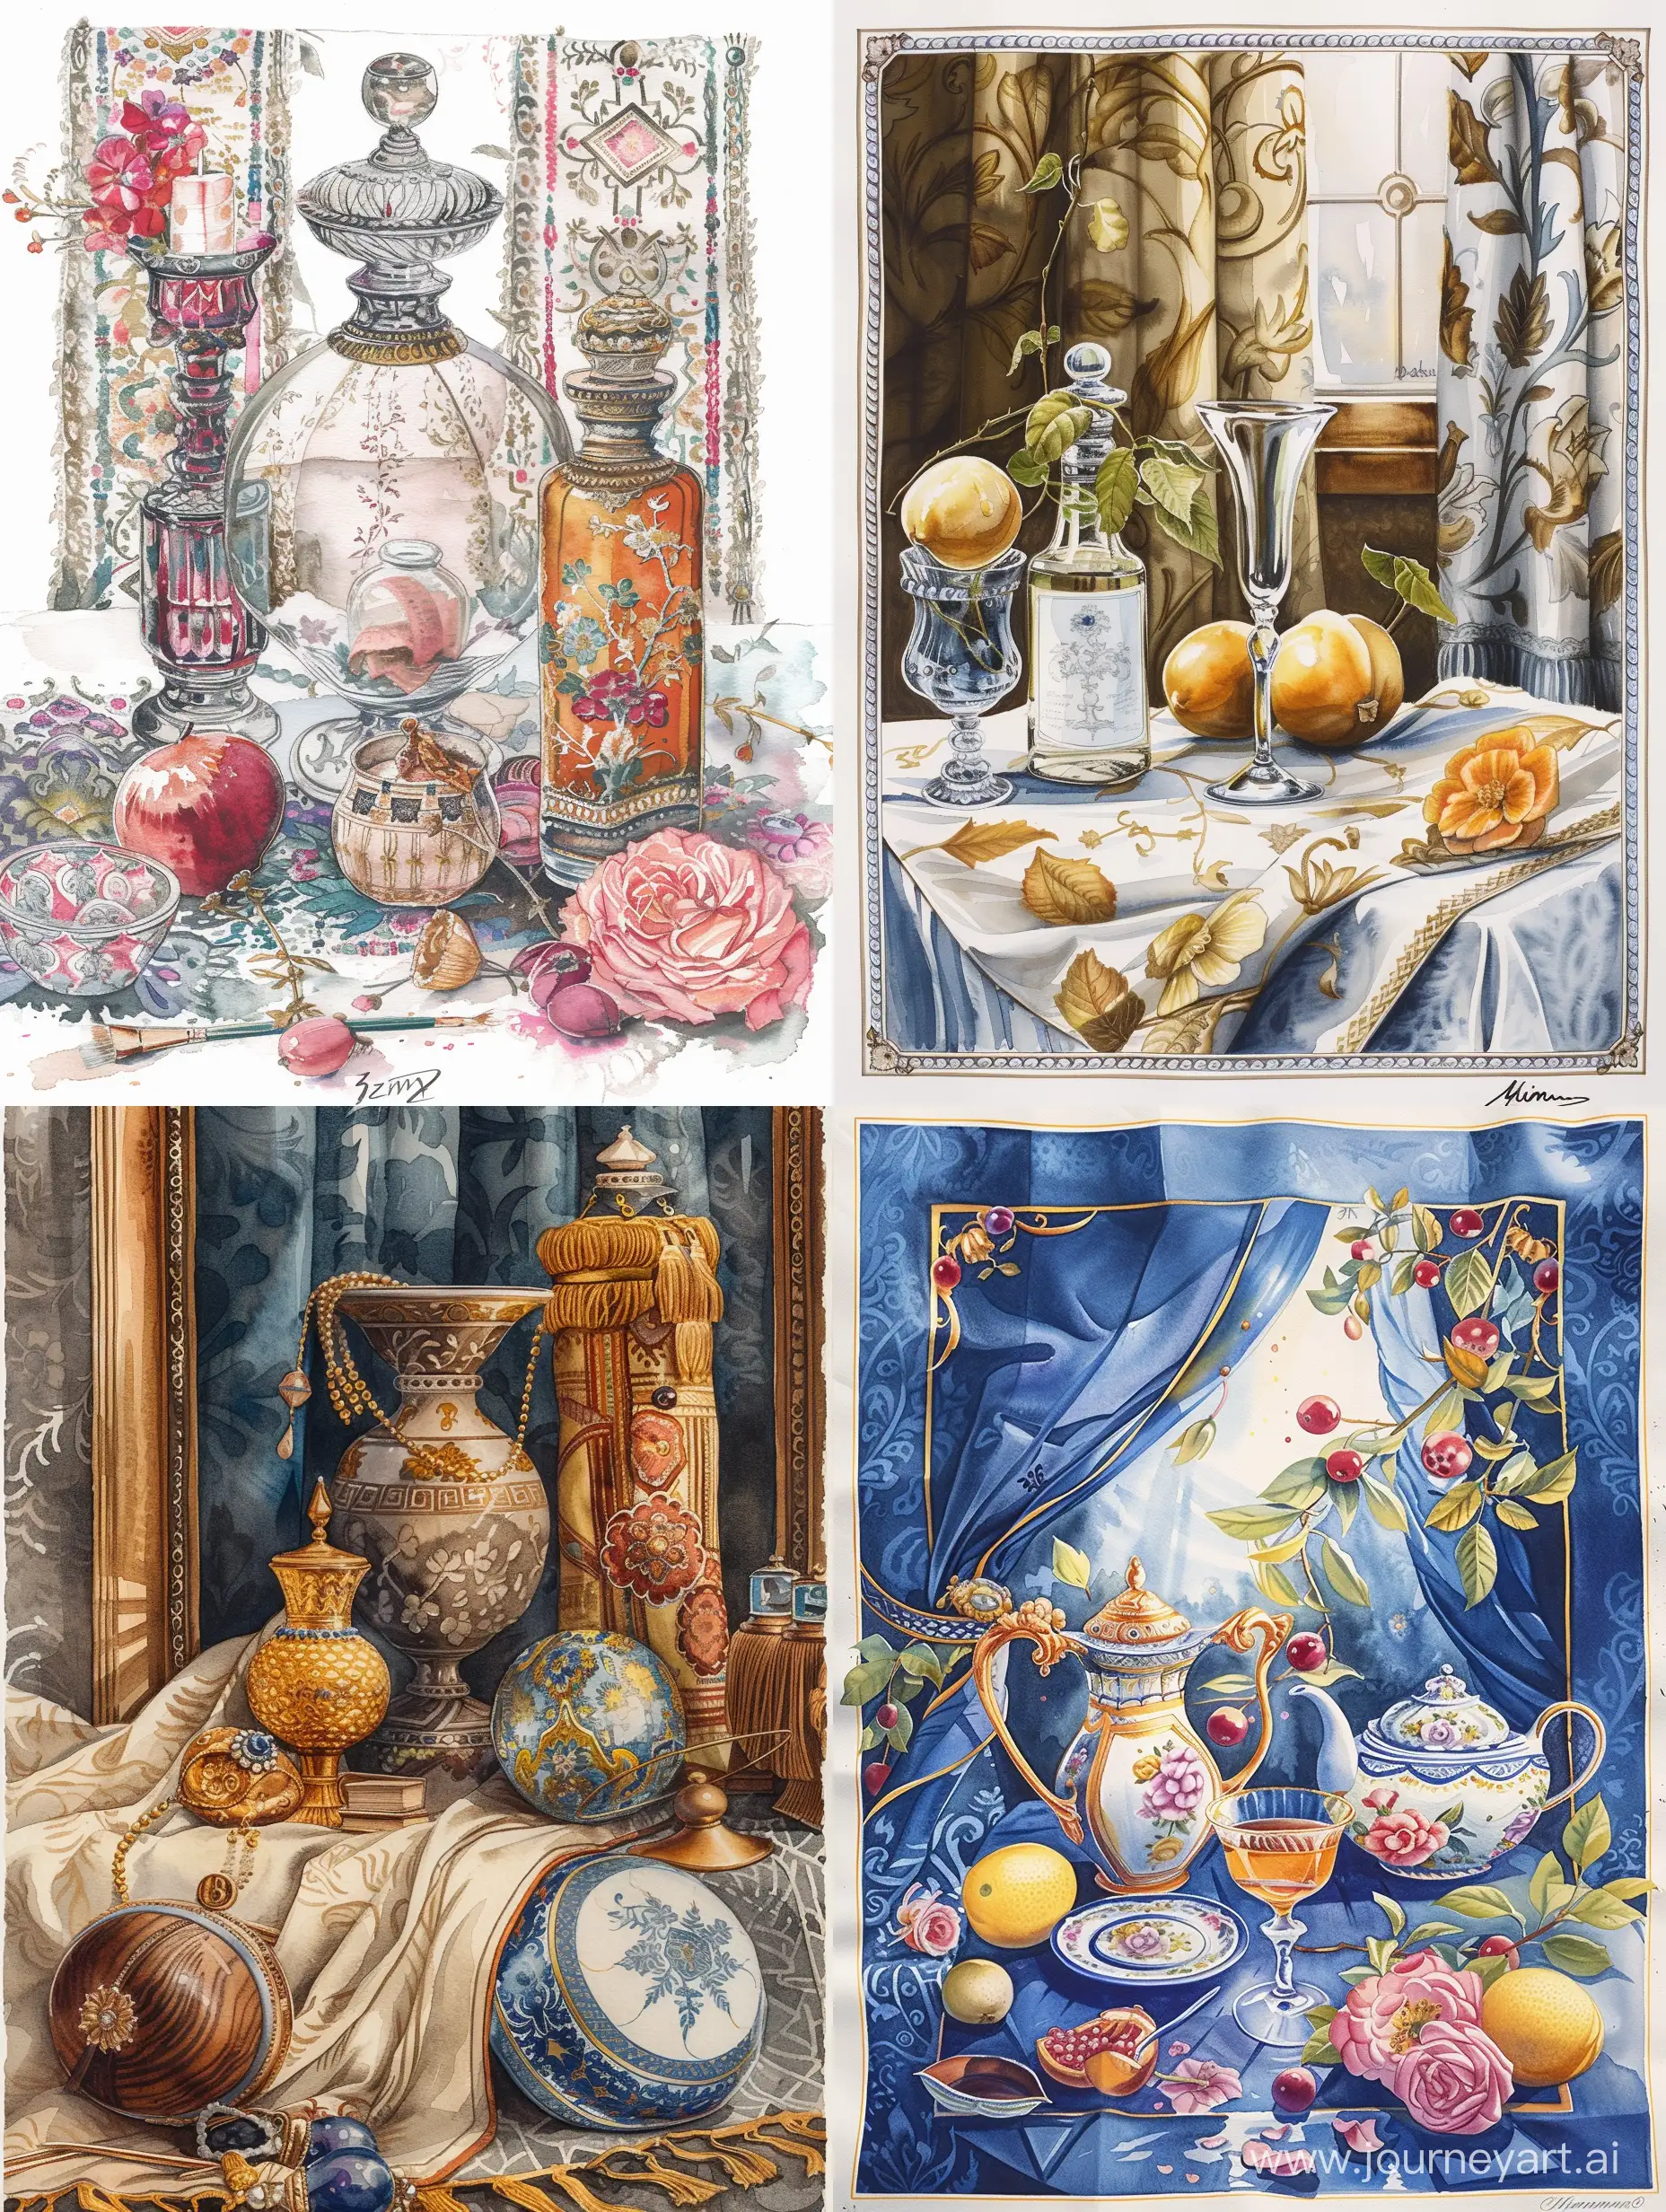 zimmerman asthetic art using watercolors to depict objects of beauty, eastern european style, elegant, inspired by themes and styles hermes uses within the artworks featured on their scarf prints, 